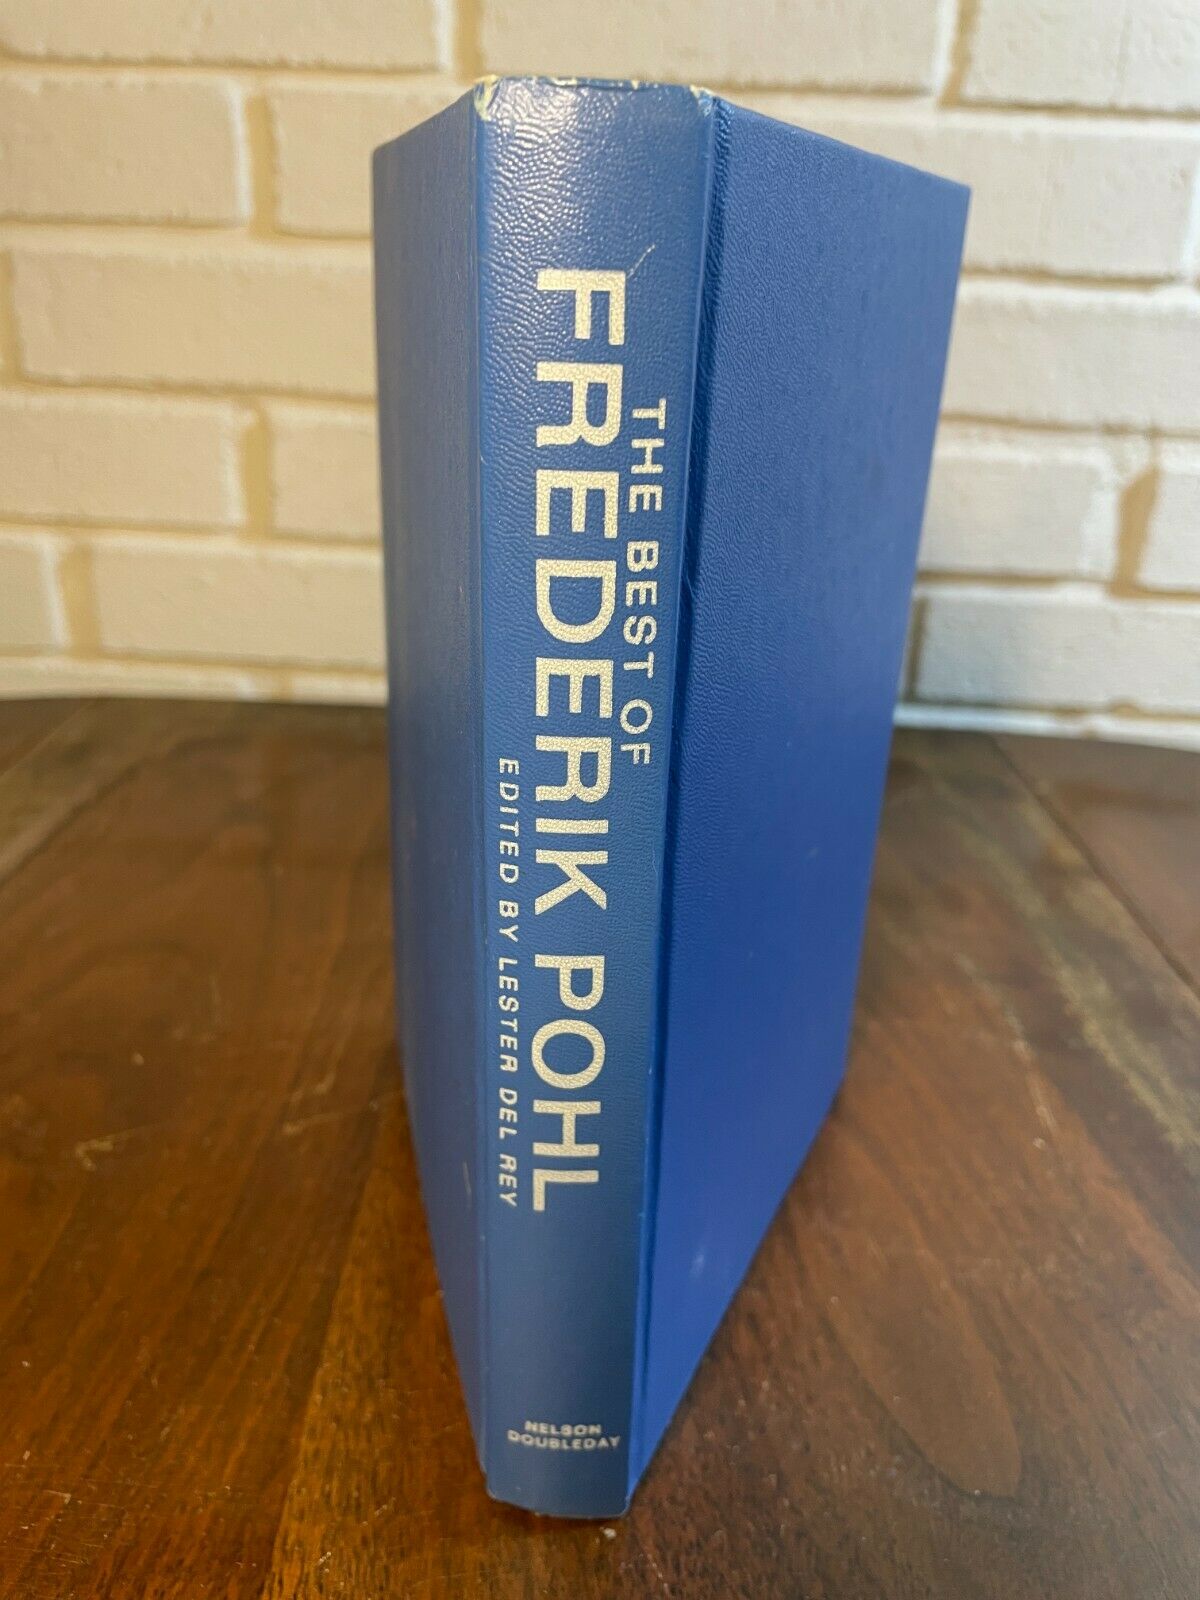 L. Del Rey THE BEST OF FREDERIK POHL First edition Hardcover DJ Science Fiction